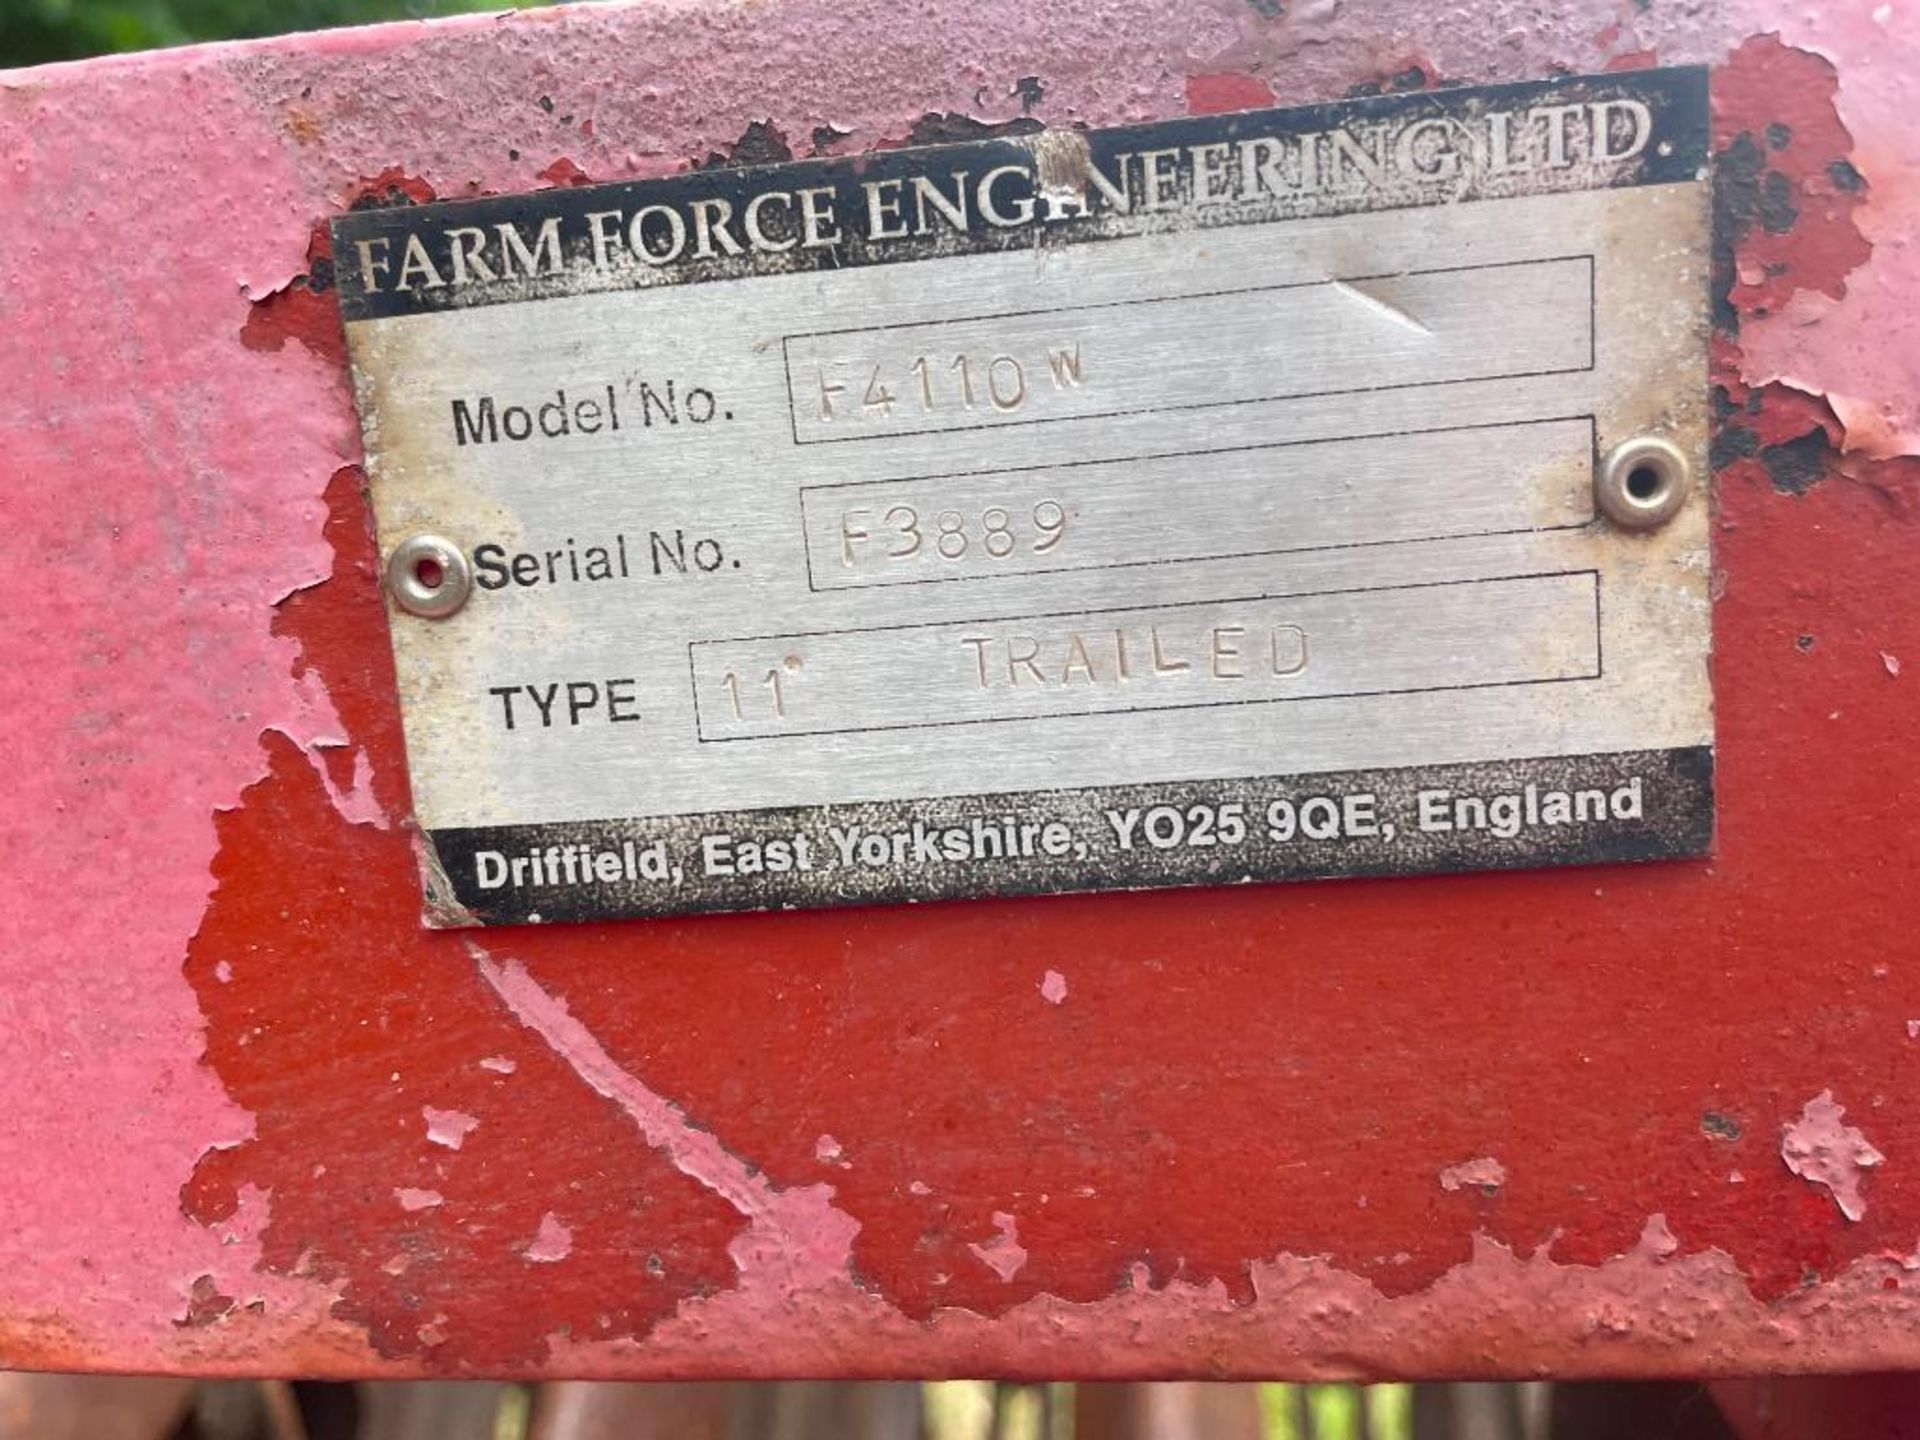 Farmforce 11ft trailed furrow press with end tow kit. Serial No: F3889 - Image 4 of 6